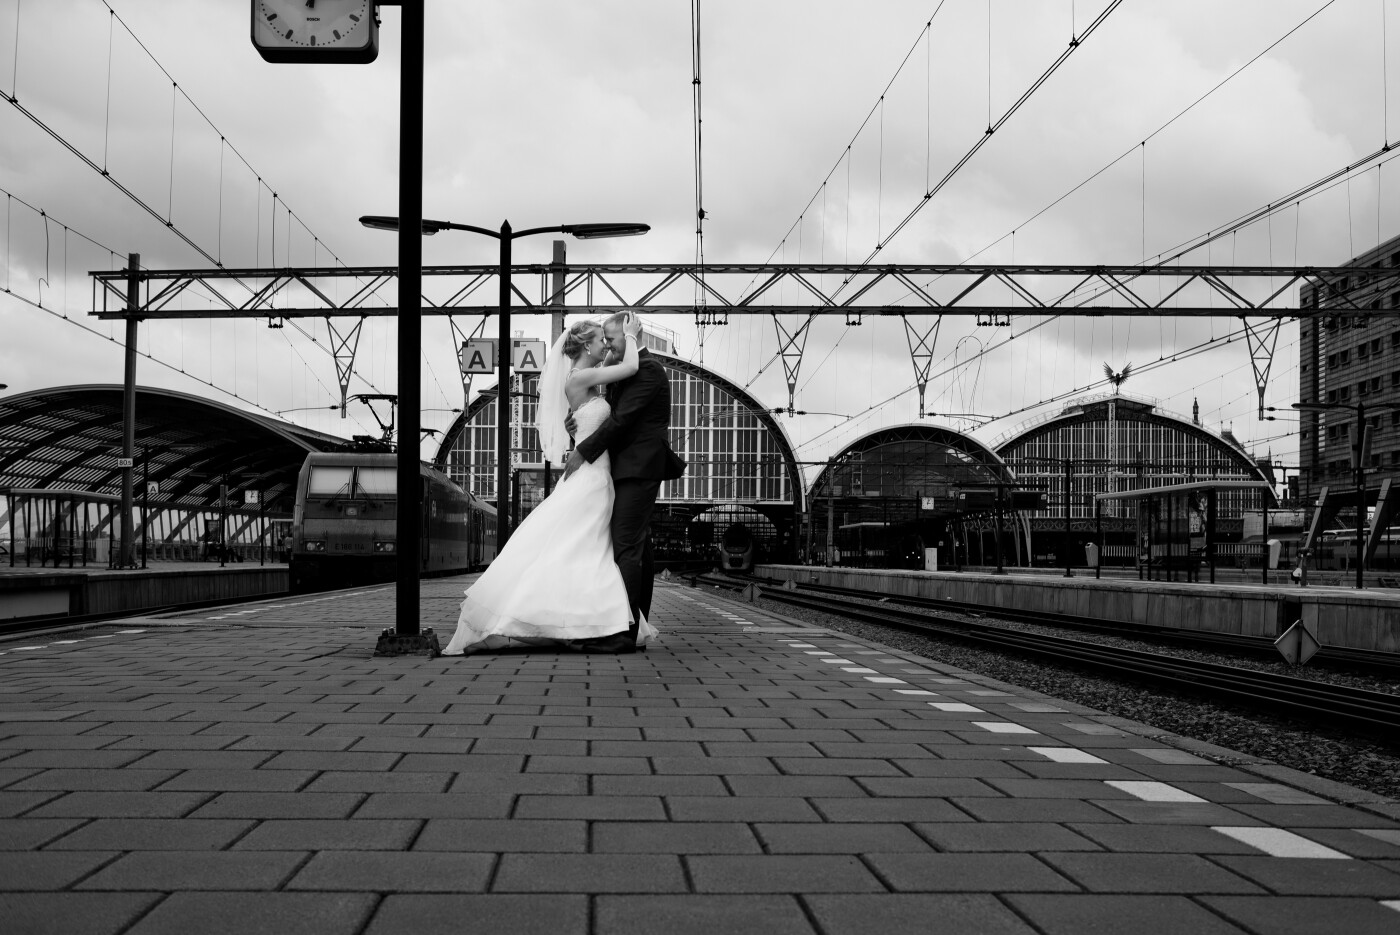 De love story begins a couple years earlier when Sjoerd & Jessica meet at the grand central station in Amsterdam. The both were looking for love, but didn’t know, the would cross paths at a train-station. It was love at first sight. So when he asked and she said yes, the new that their pictures could ben taken in one place only and that would ben the grand central station Amsterdam. And that’s how it went. They sad, yes and we went tot de train station and did a beautiful photoshoot!